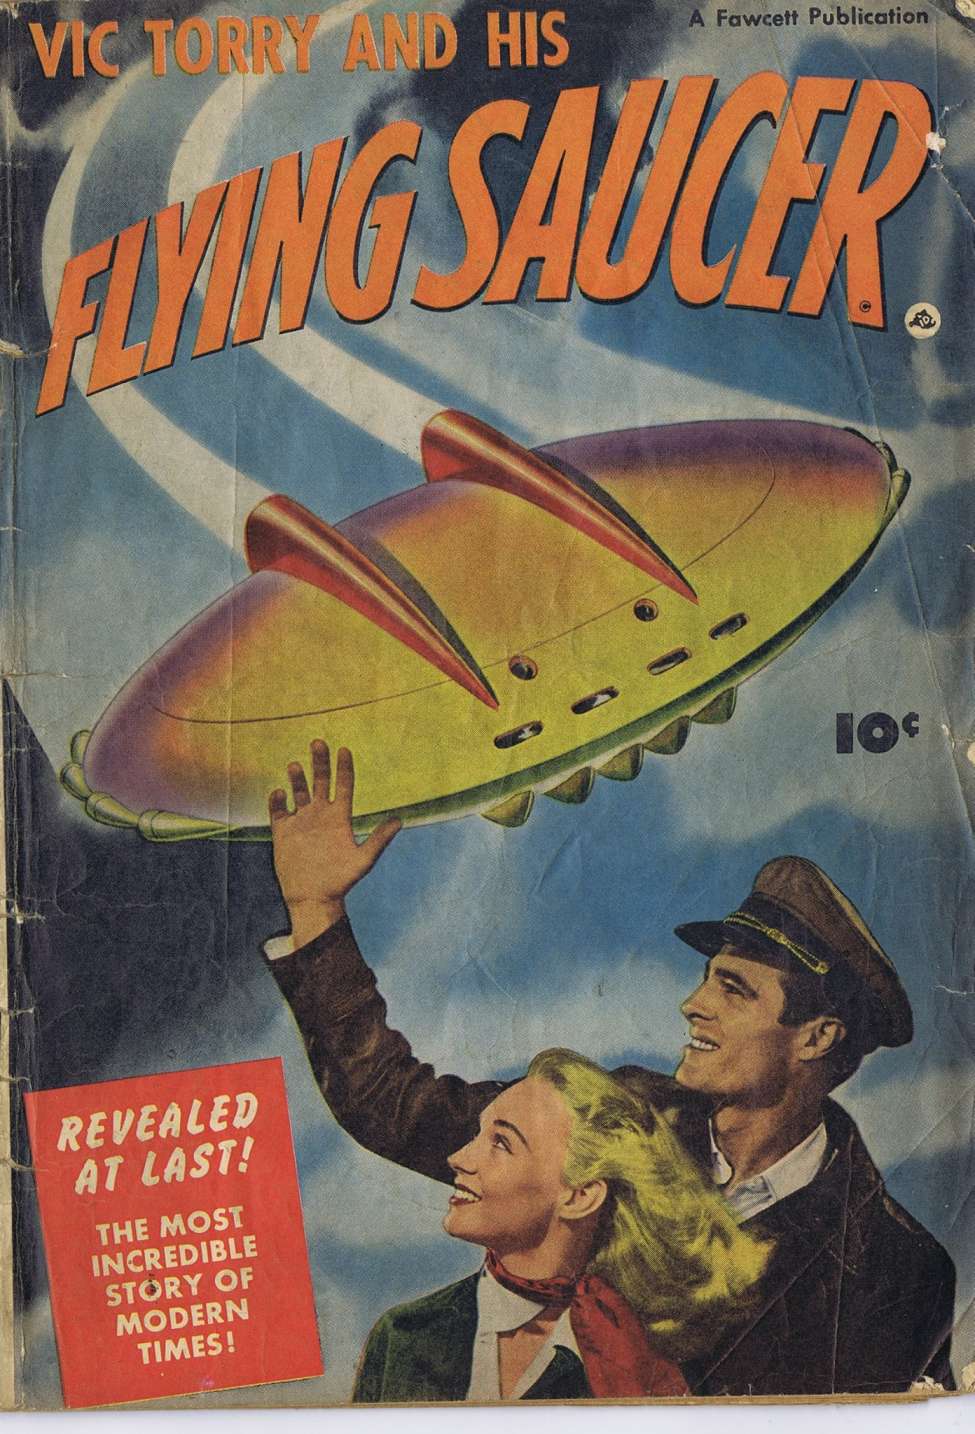 Book Cover For Vic Torry and His Flying Saucer - Version 2